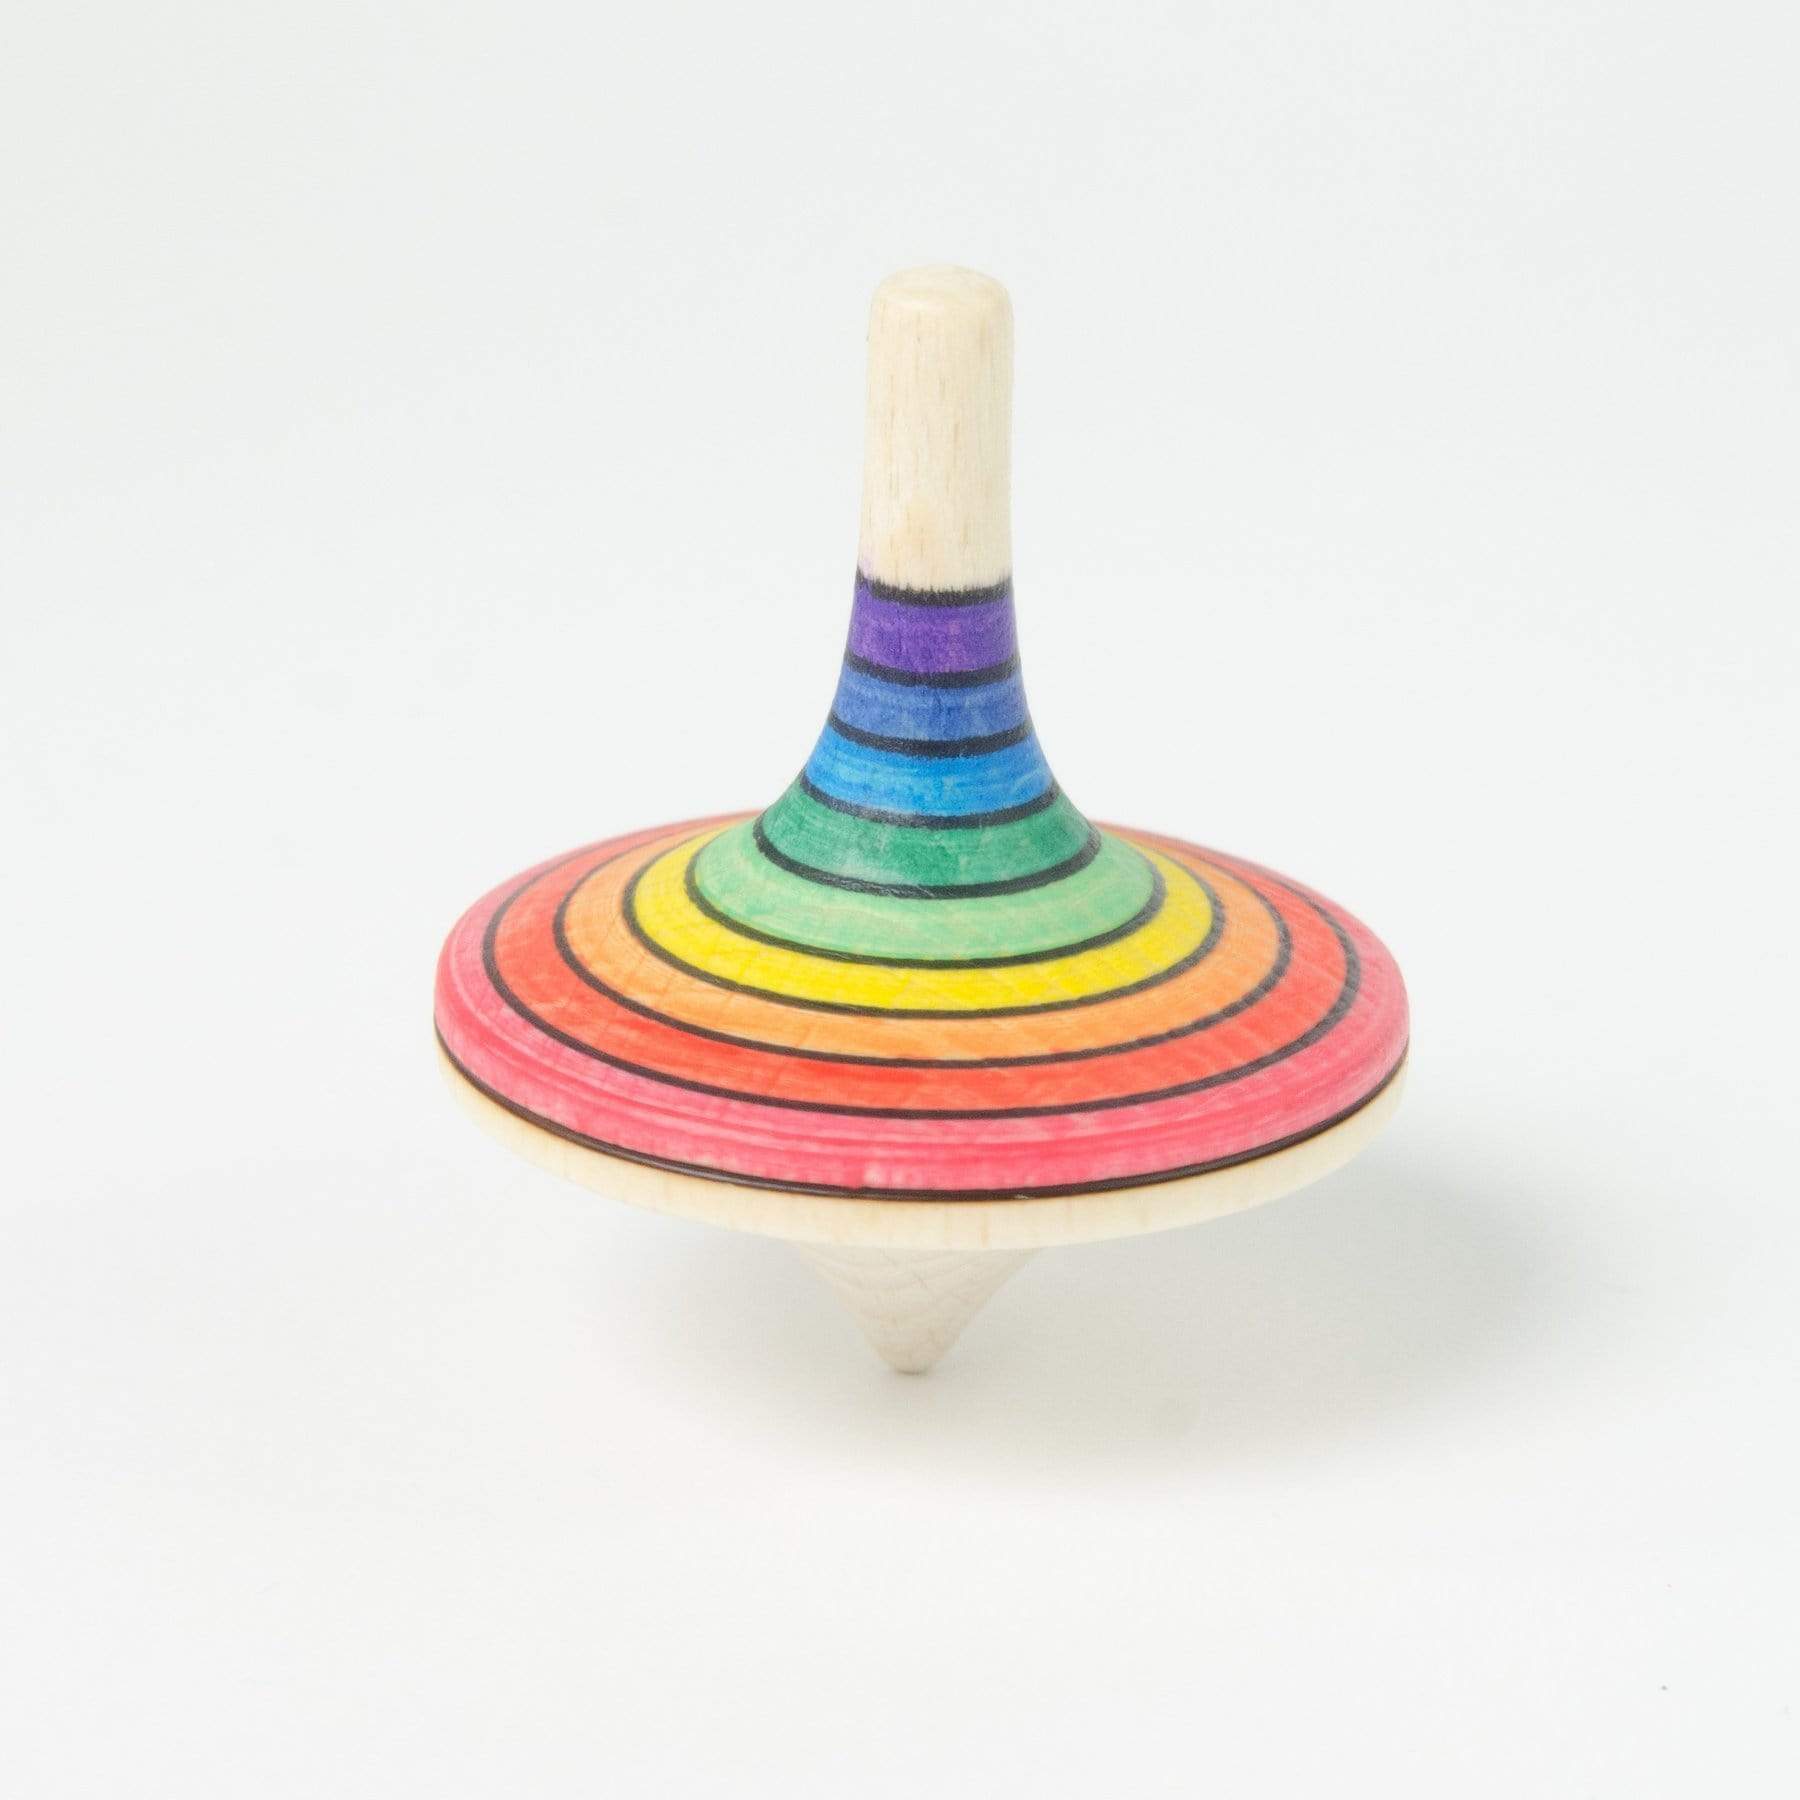 Mader Rallye Spinning Top Rainbow (Red Outside) - thetinycrate